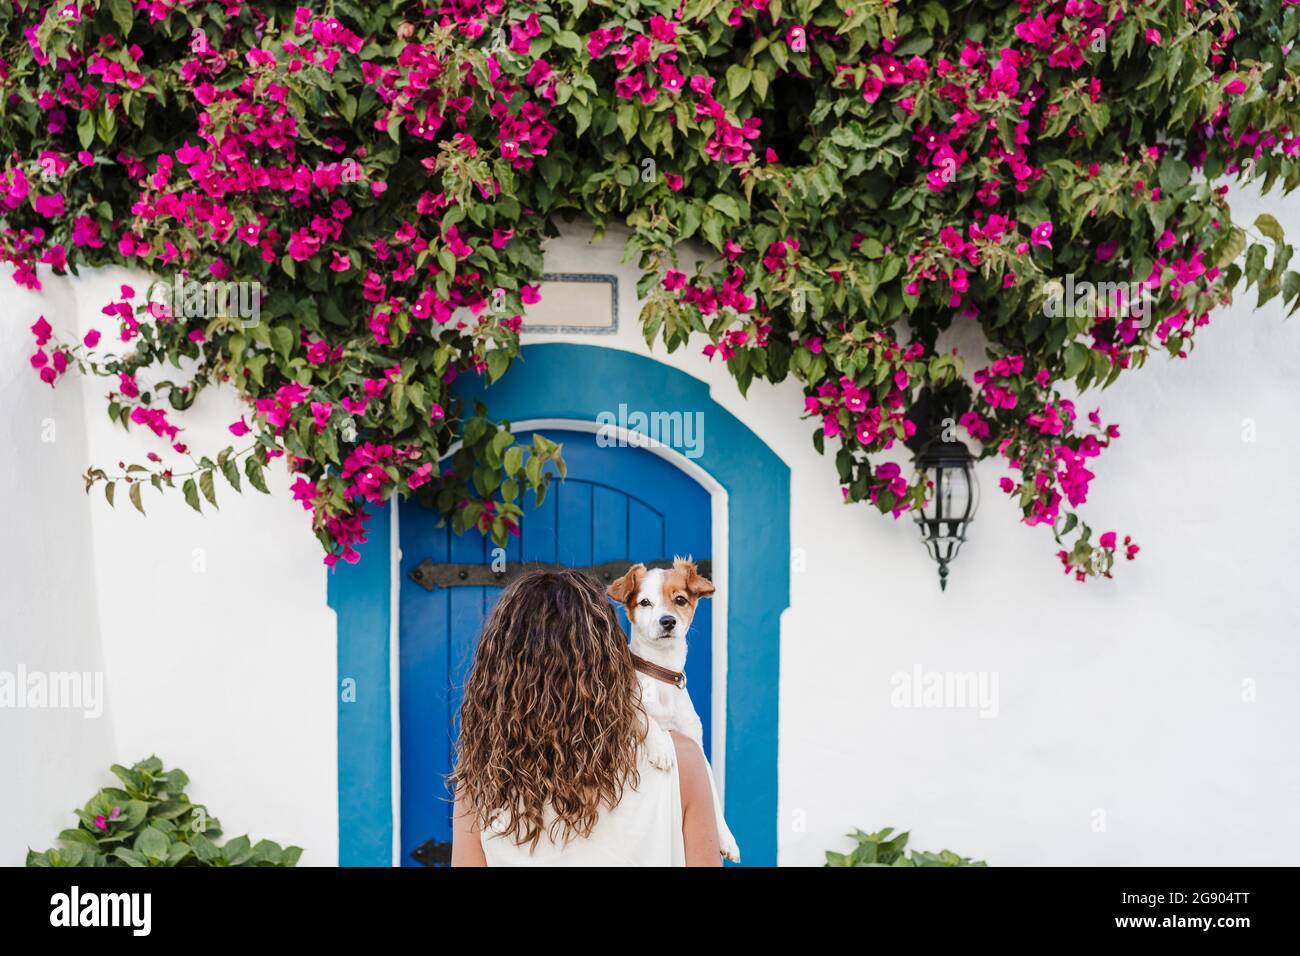 Woman with dog in front of flowering plant on wall Stock Photo